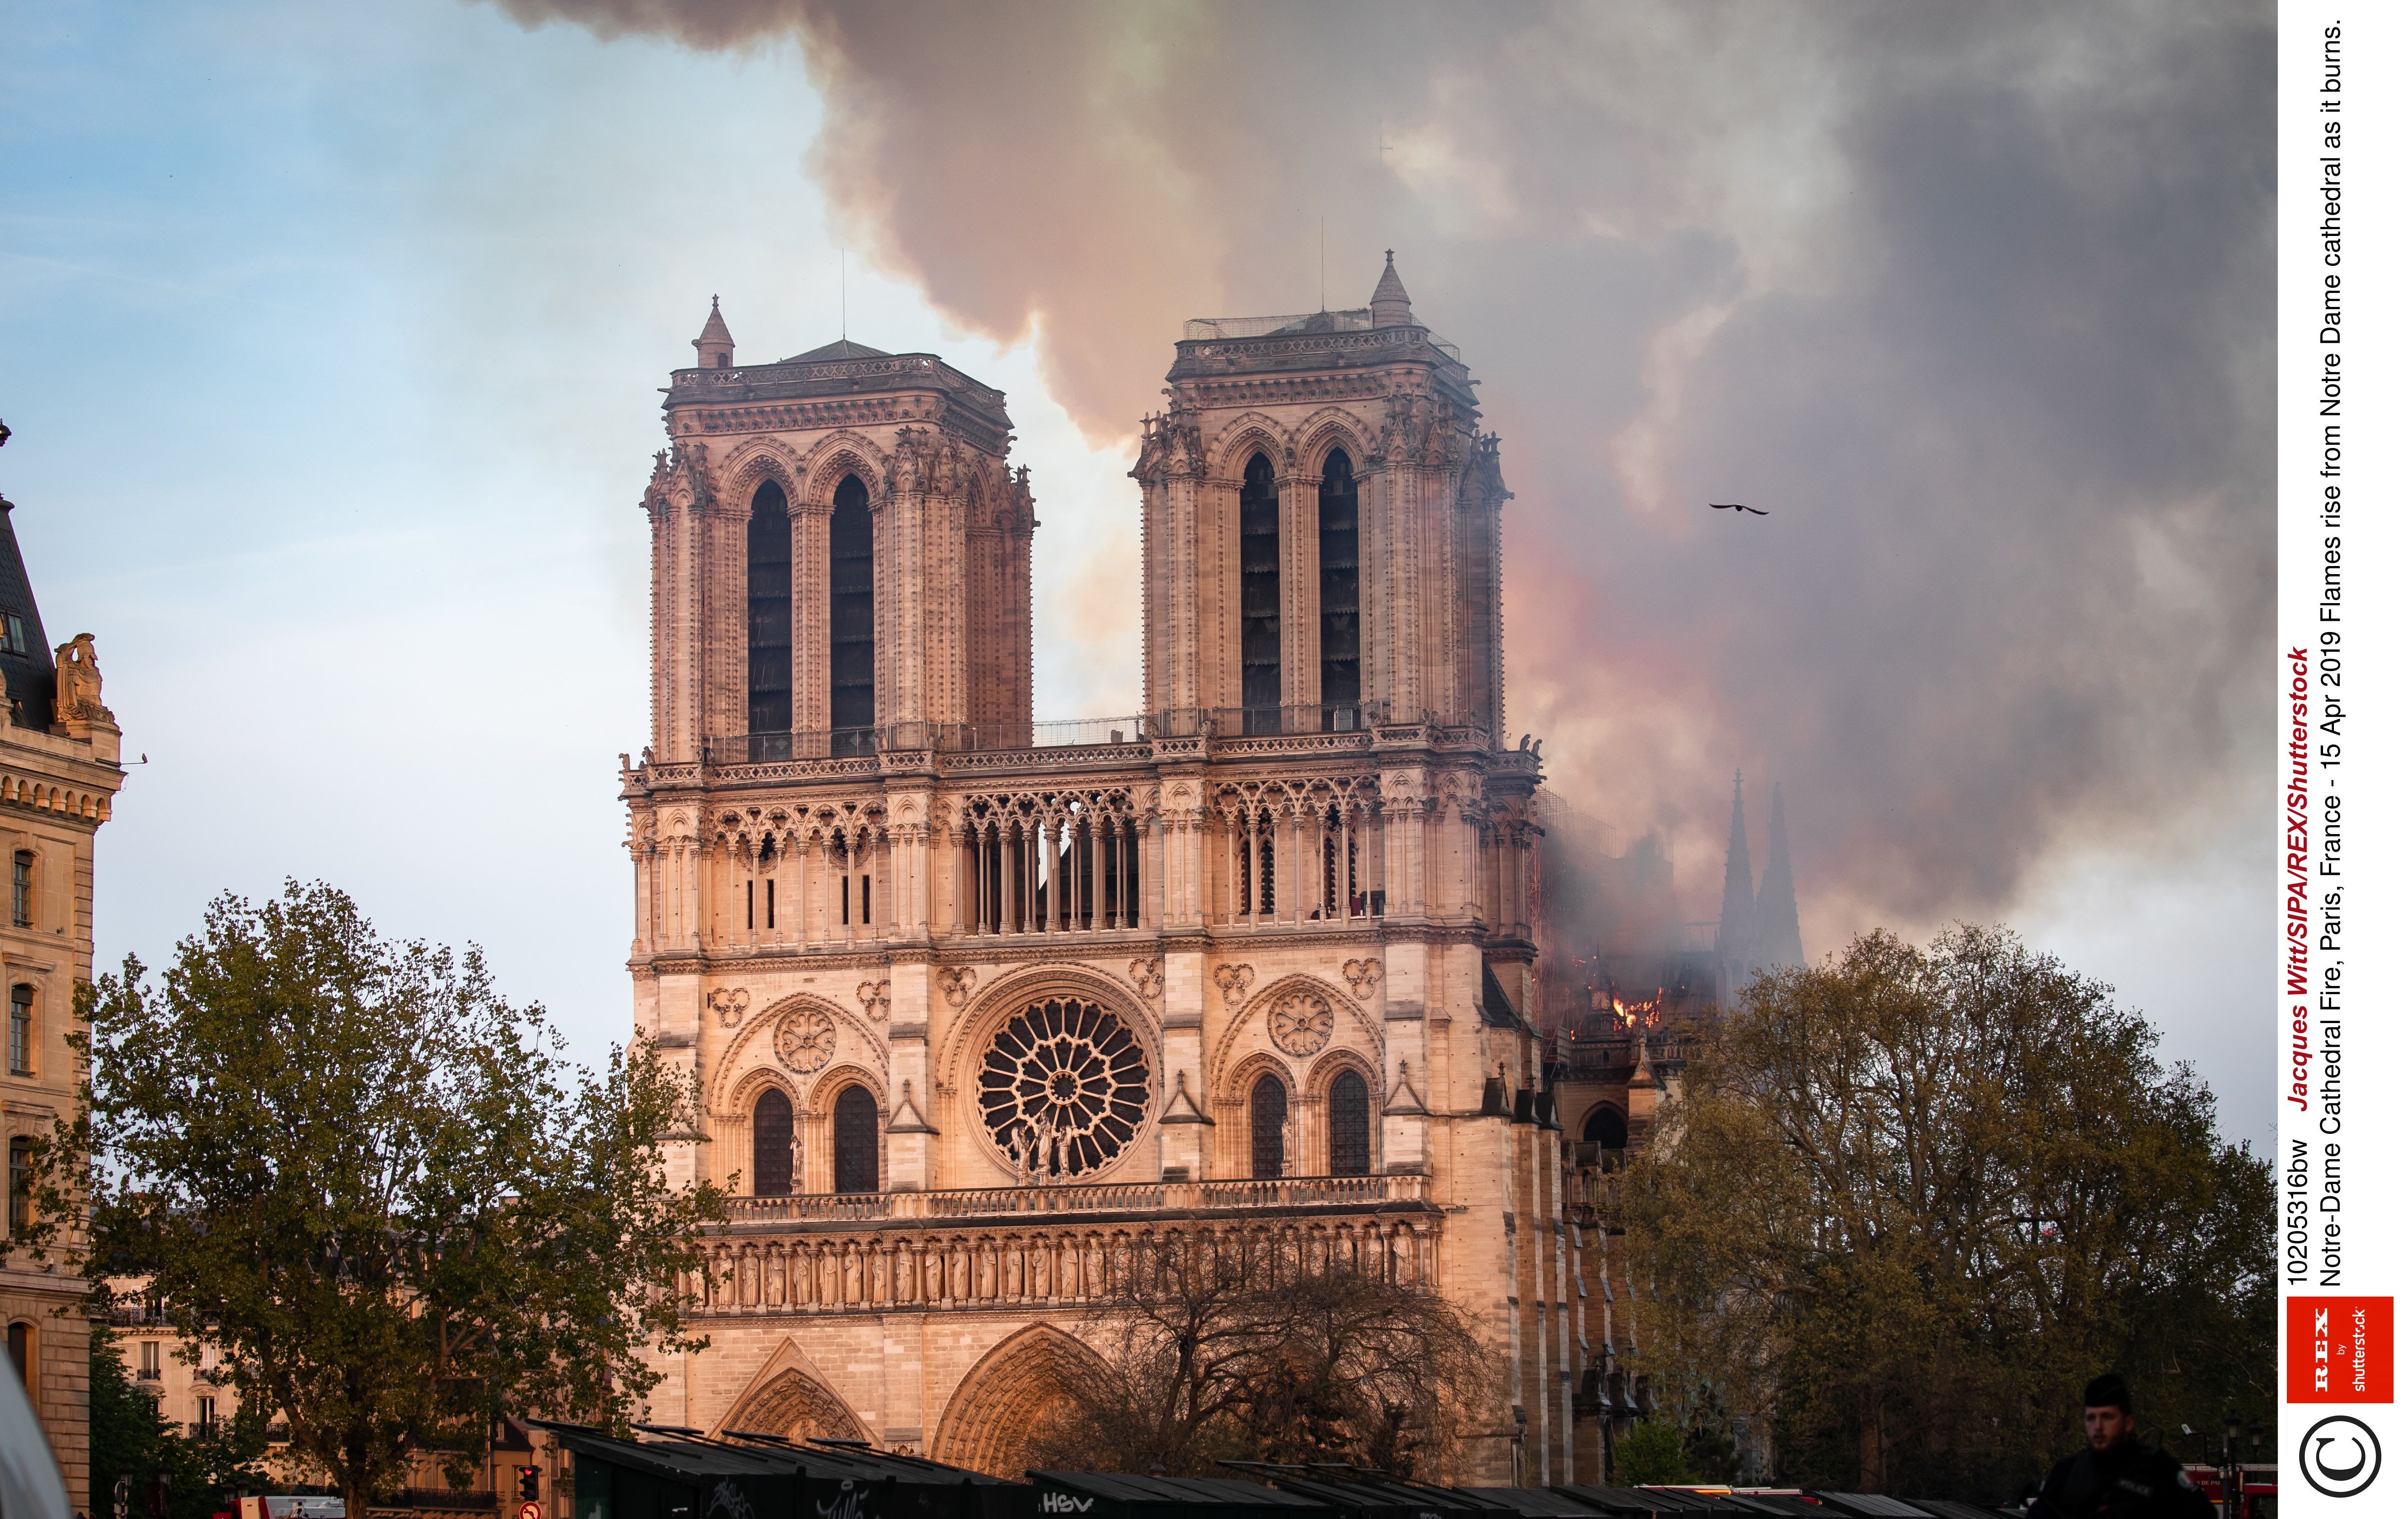 Gucci And Louis Vuitton Owners Donate £260m To Help Notre-Dame